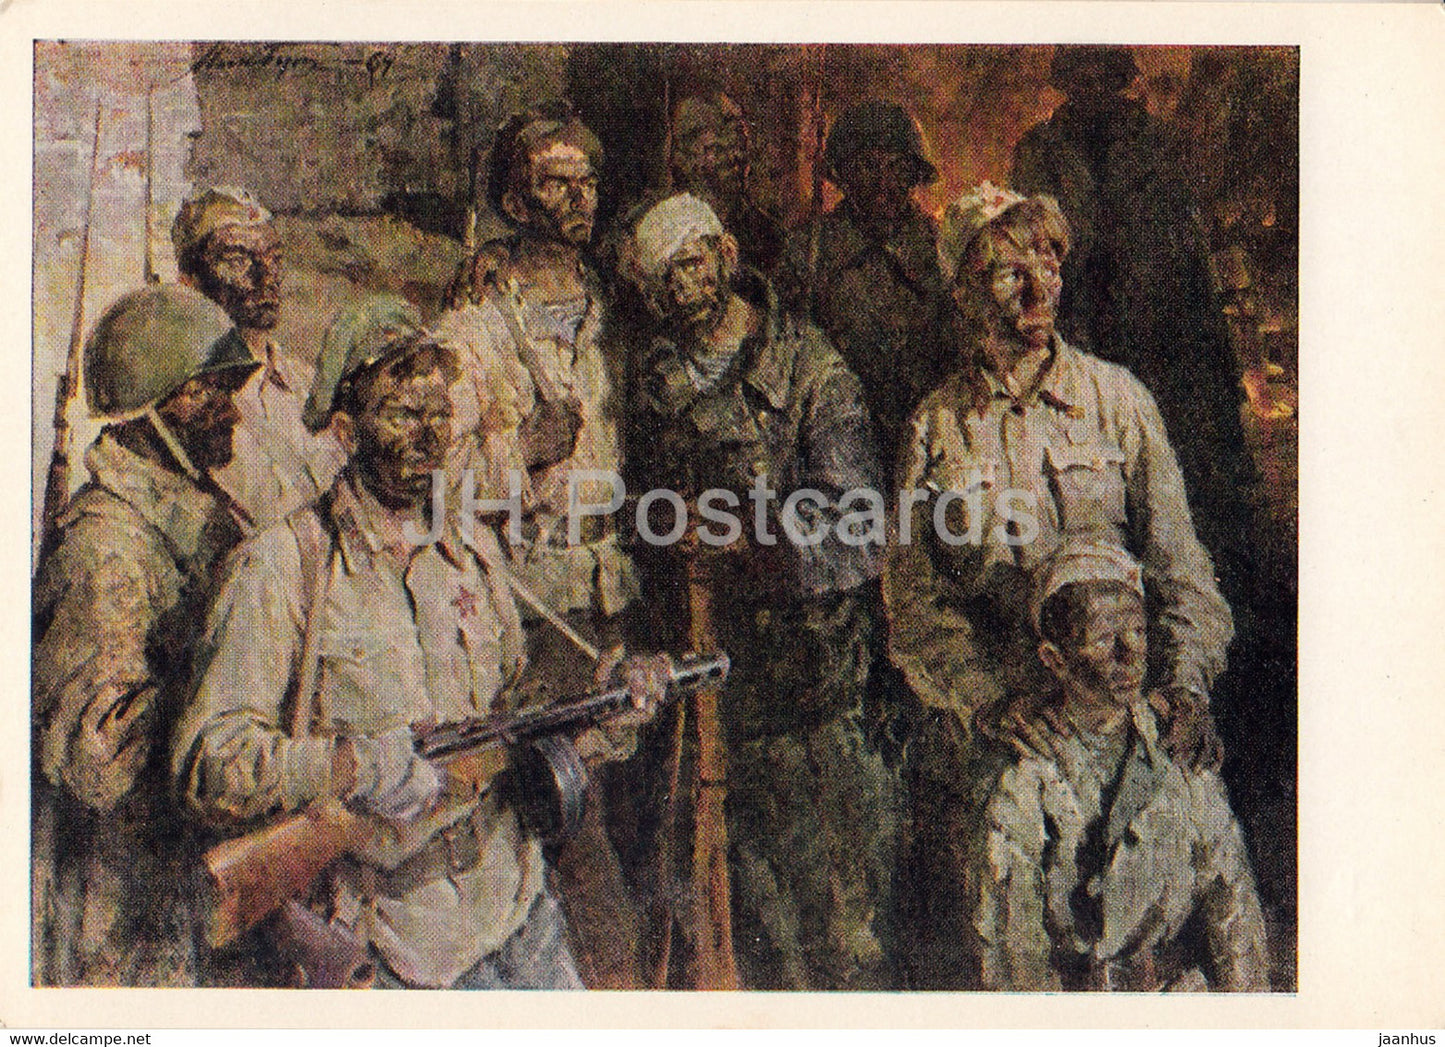 Guarding the World - painting by N. But - Underground garrison soldiers - military - art - 1965 - Russia USSR - unused - JH Postcards